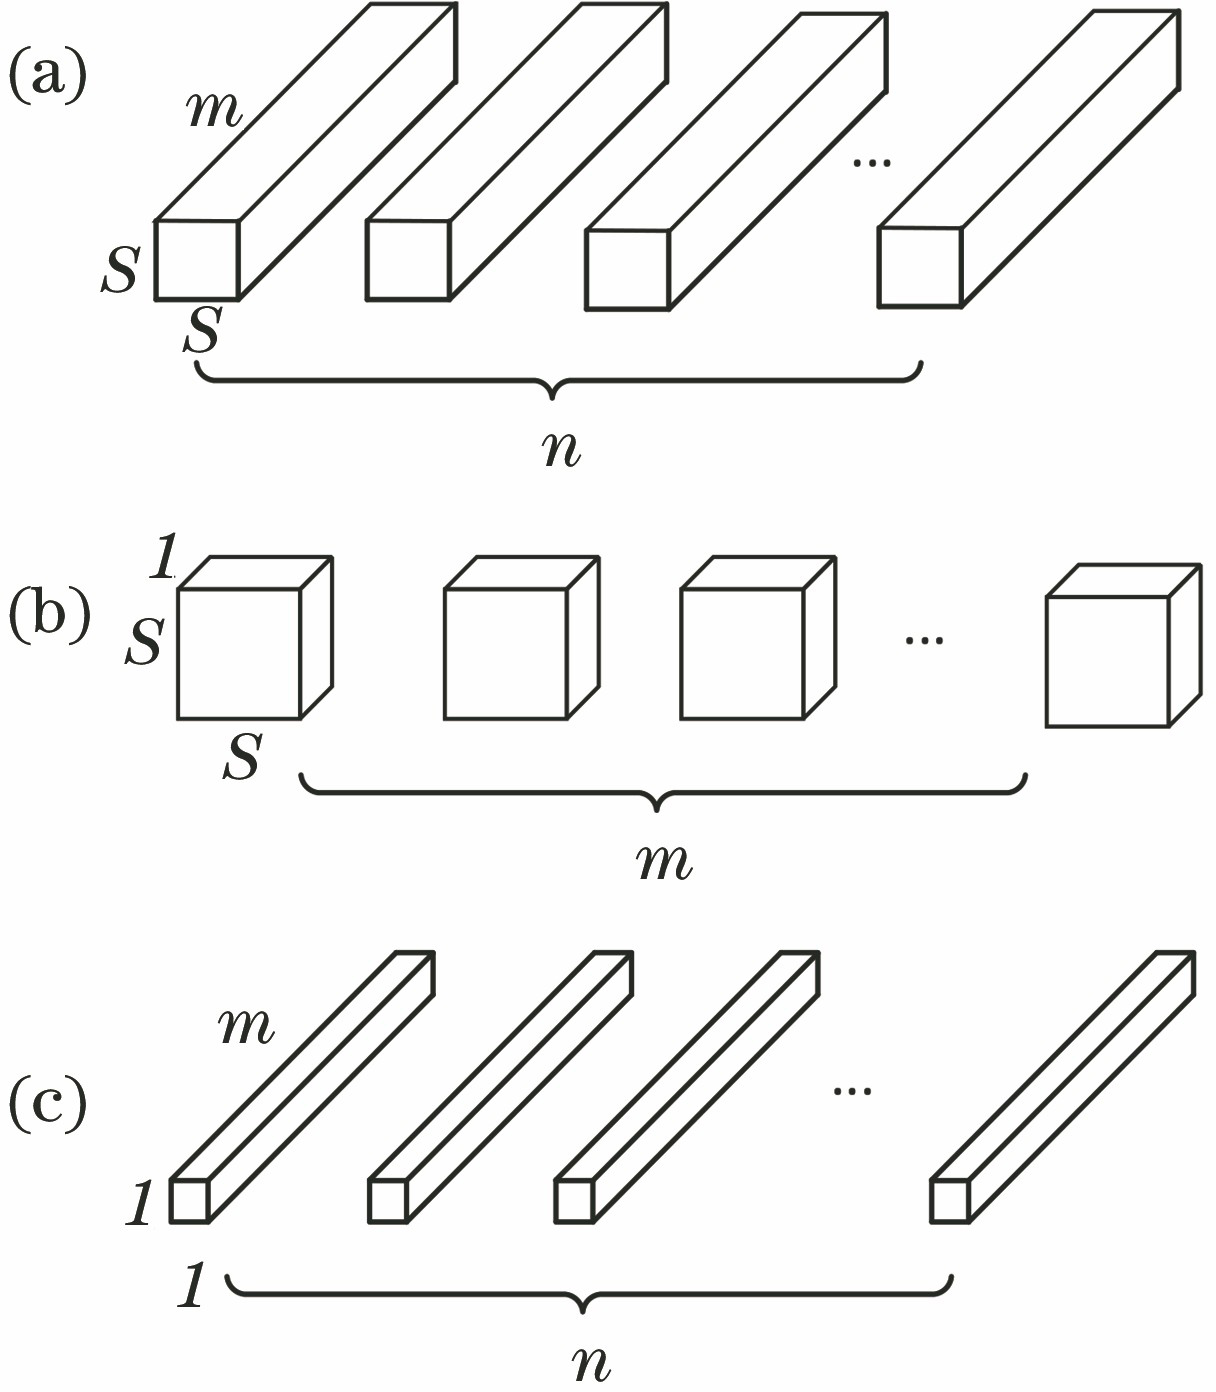 Basic structure of depth separable convolution network. (a) Standard convolution filter; (b) depthwise convolution filter; (c) pointwise convolution filter